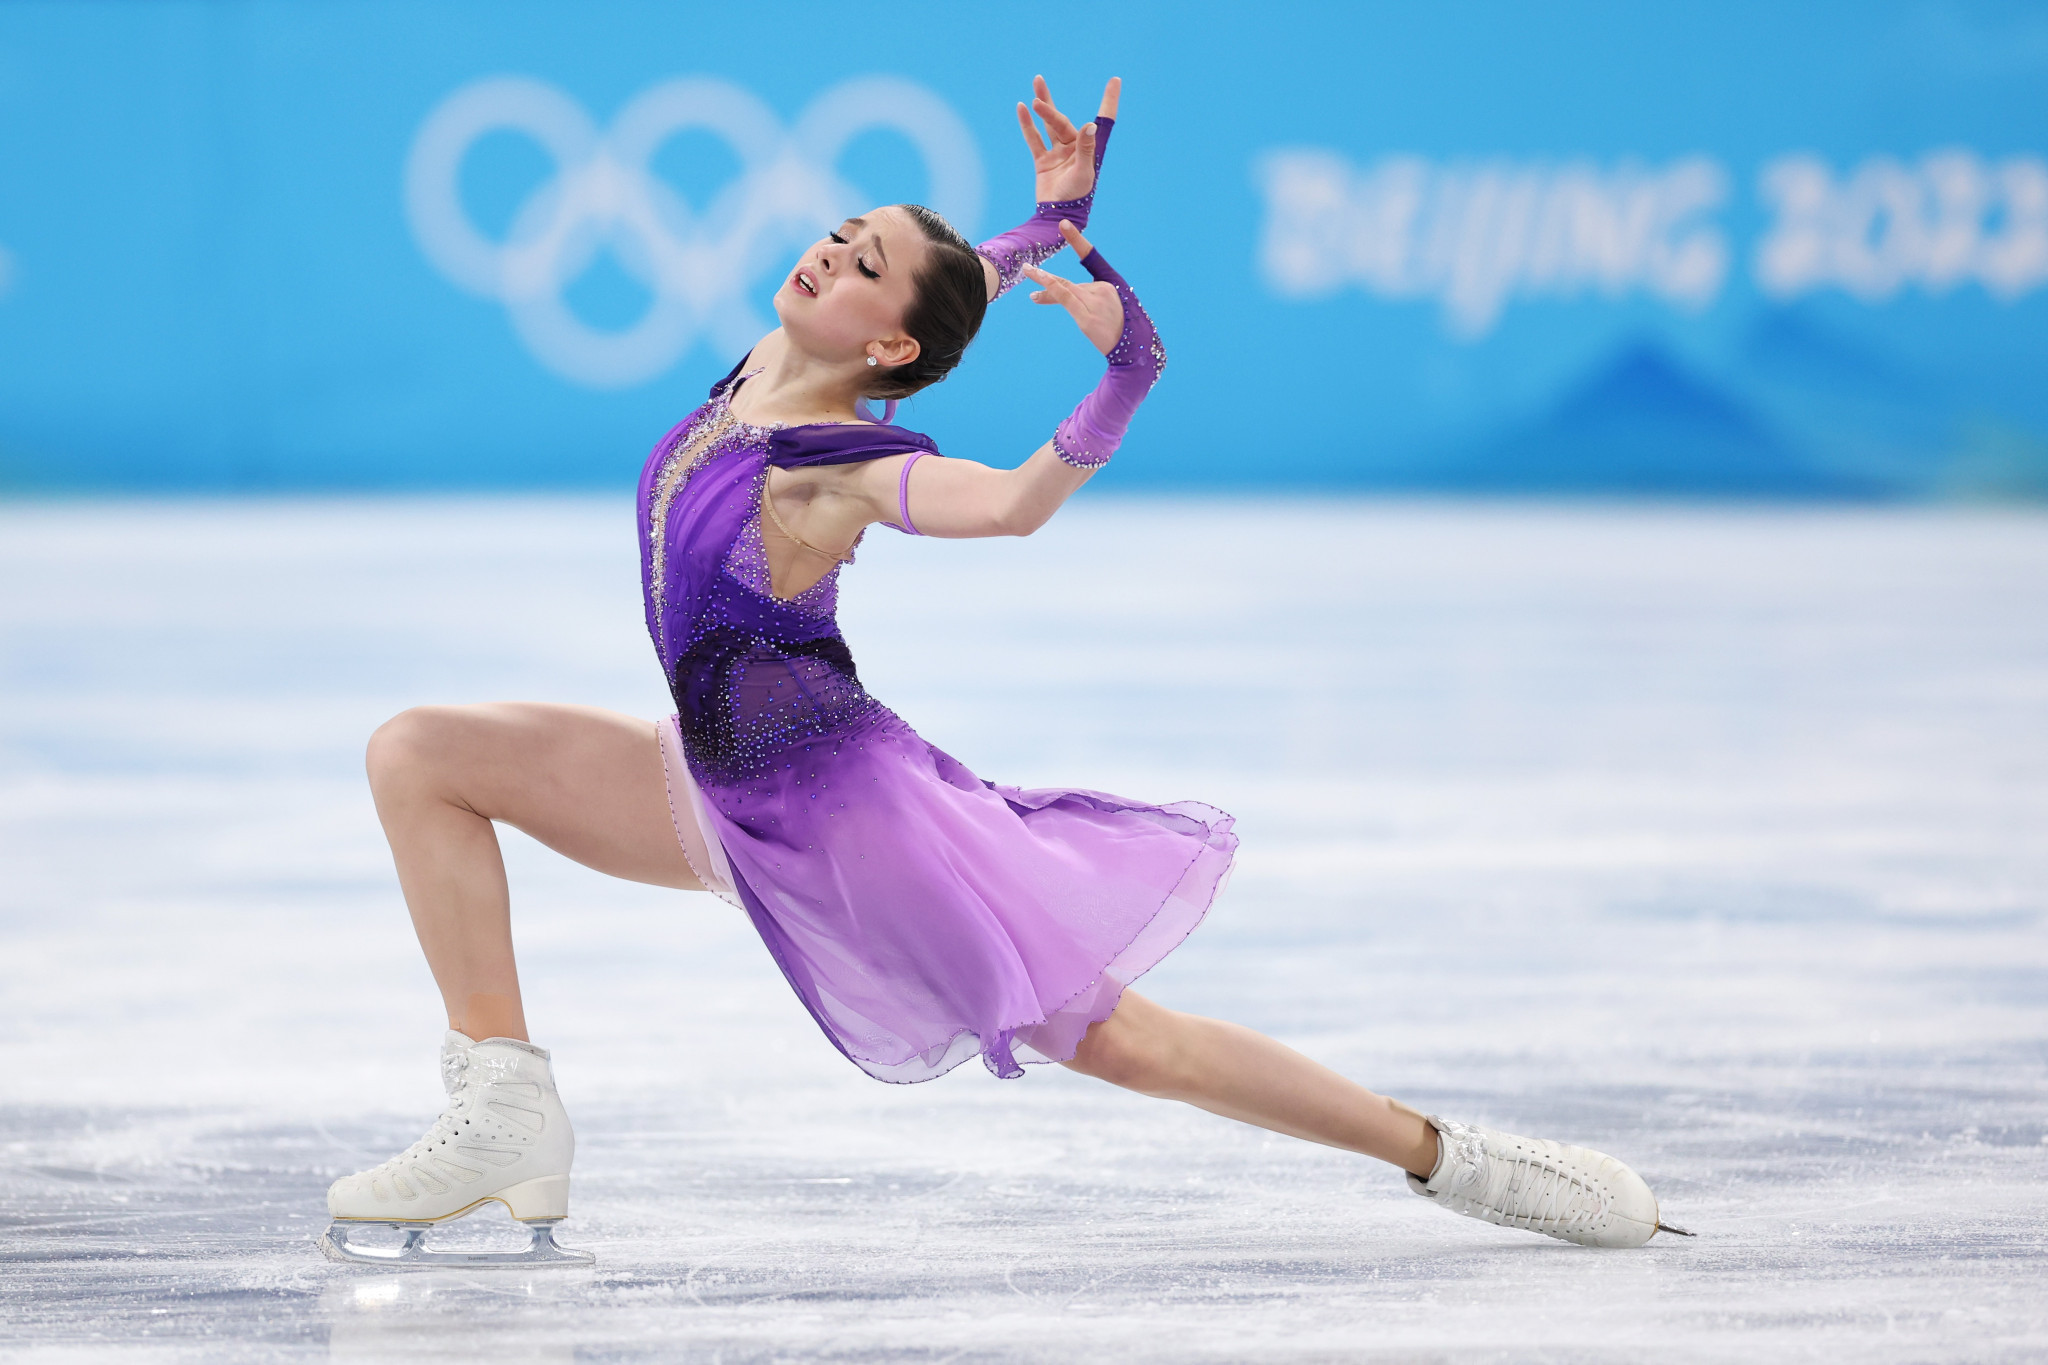 The Kamila Valieva case is set to continue to hang over the ISU ©Getty Images